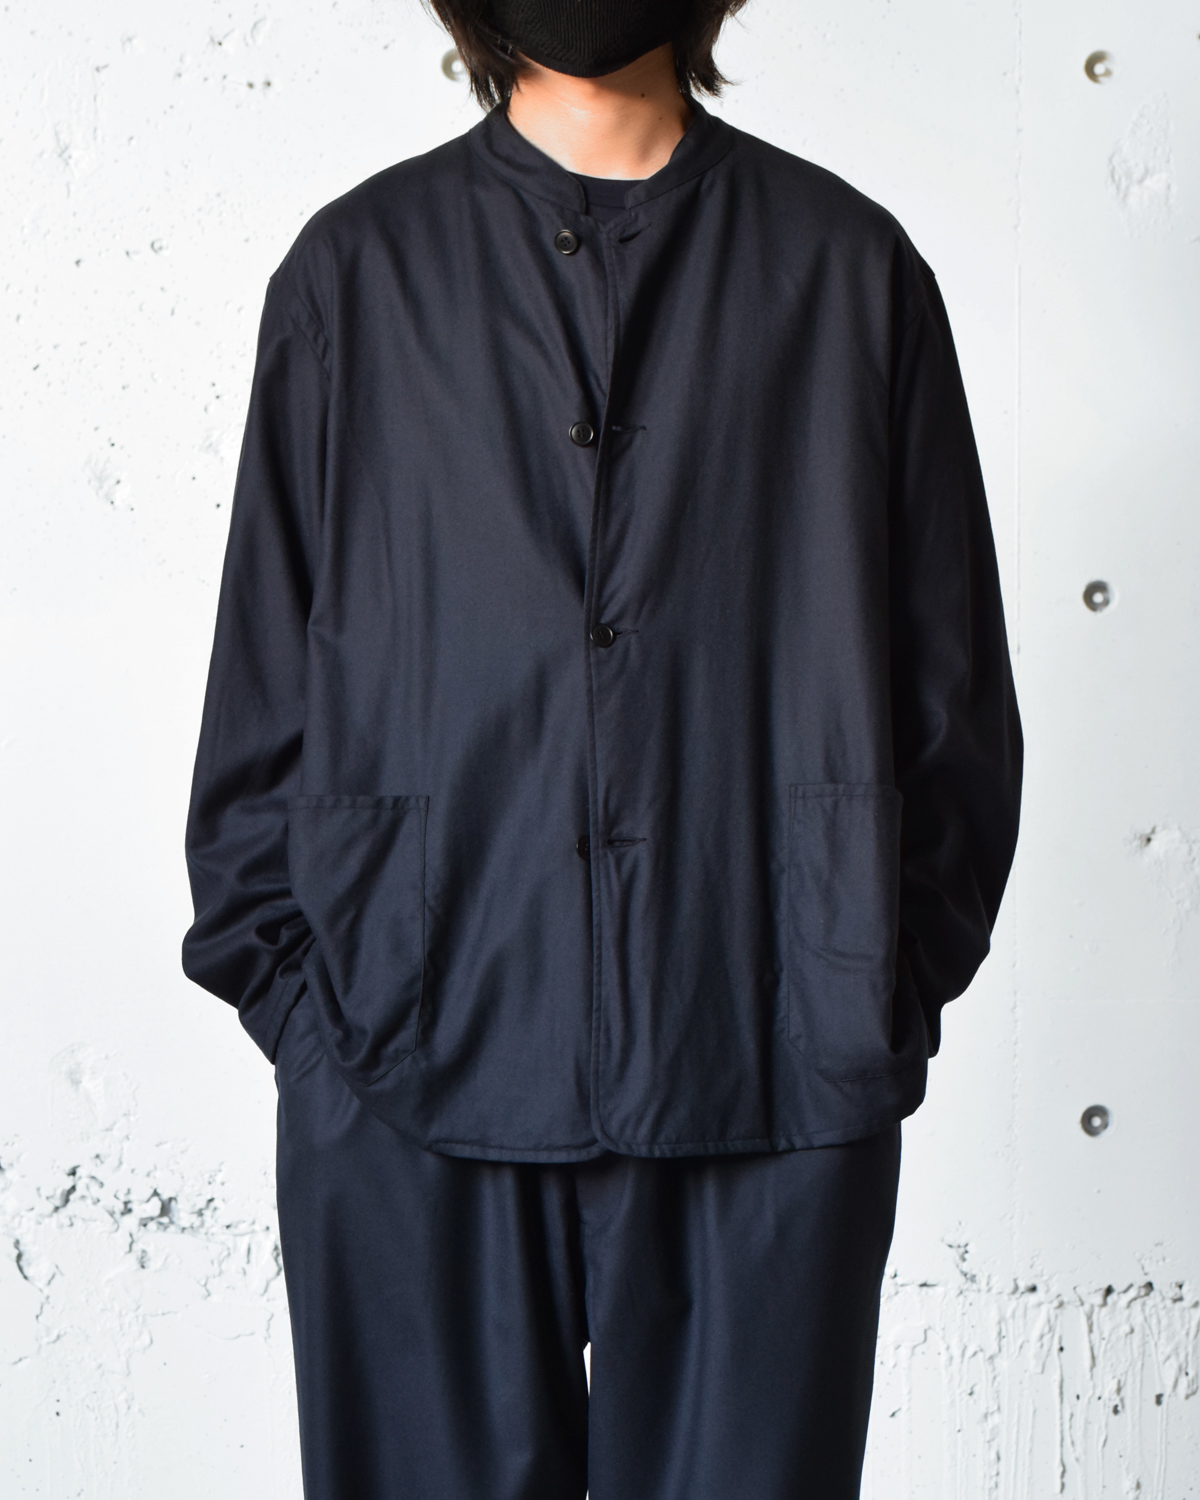 COMOLI “AW21 COLLECTION” -4th DELIVERY- | MAIDENS SHOP | メイデンズショップ